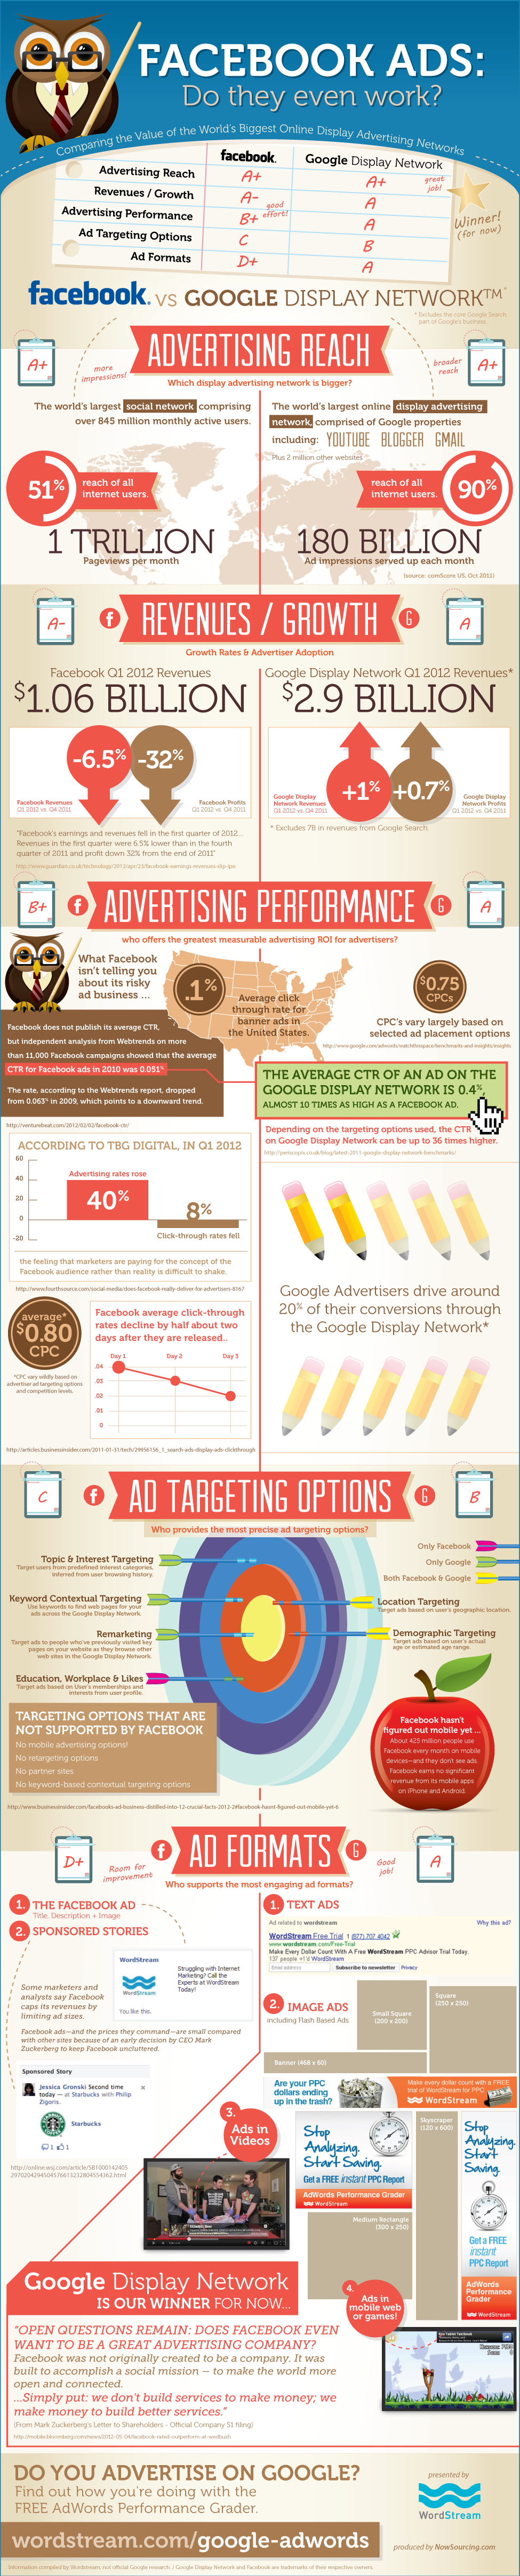 Facebook vs. Google Display Advertising - Comparing the value of the world's largest advertising venues. [INFOGRAPHIC]